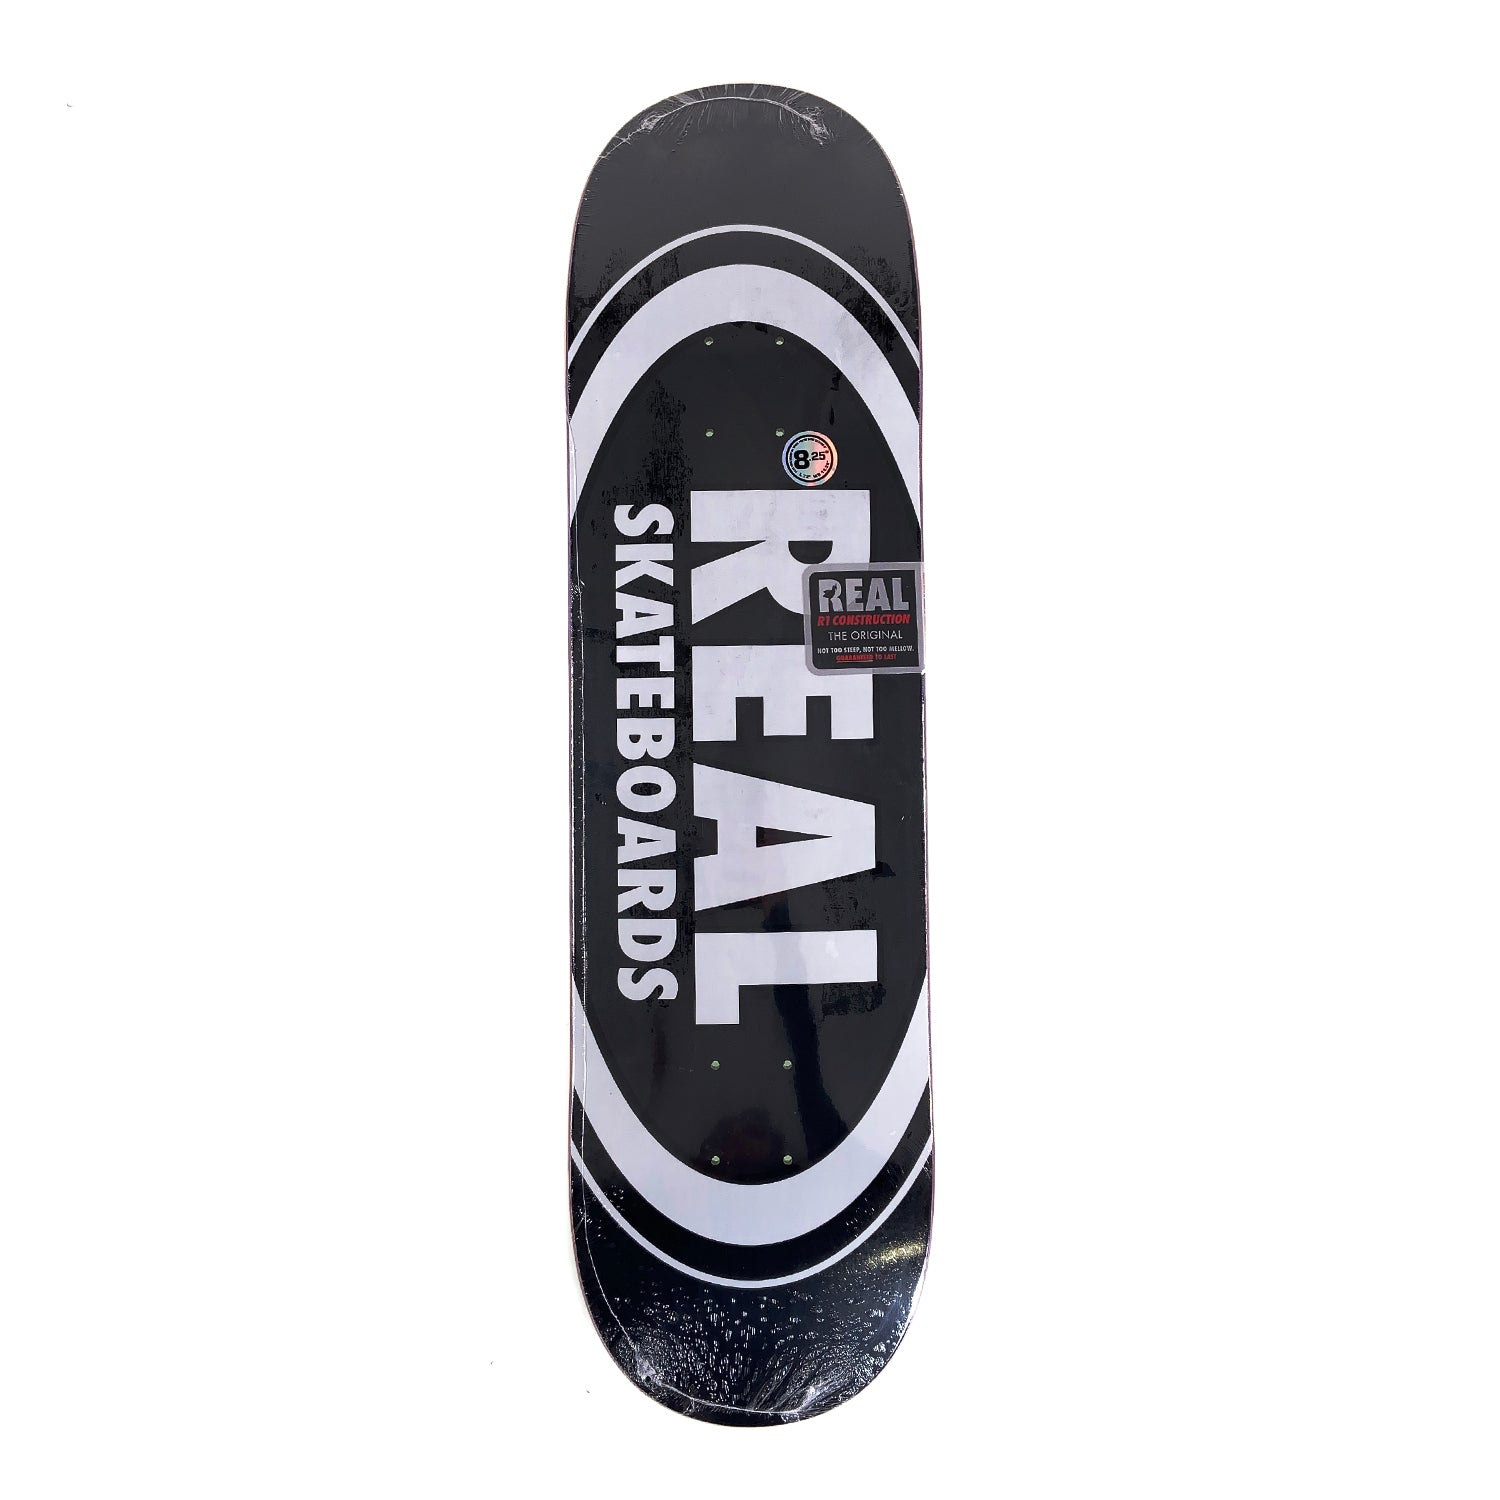 Real - 8.5" - Team Classic Oval Deck - Black - Prime Delux Store